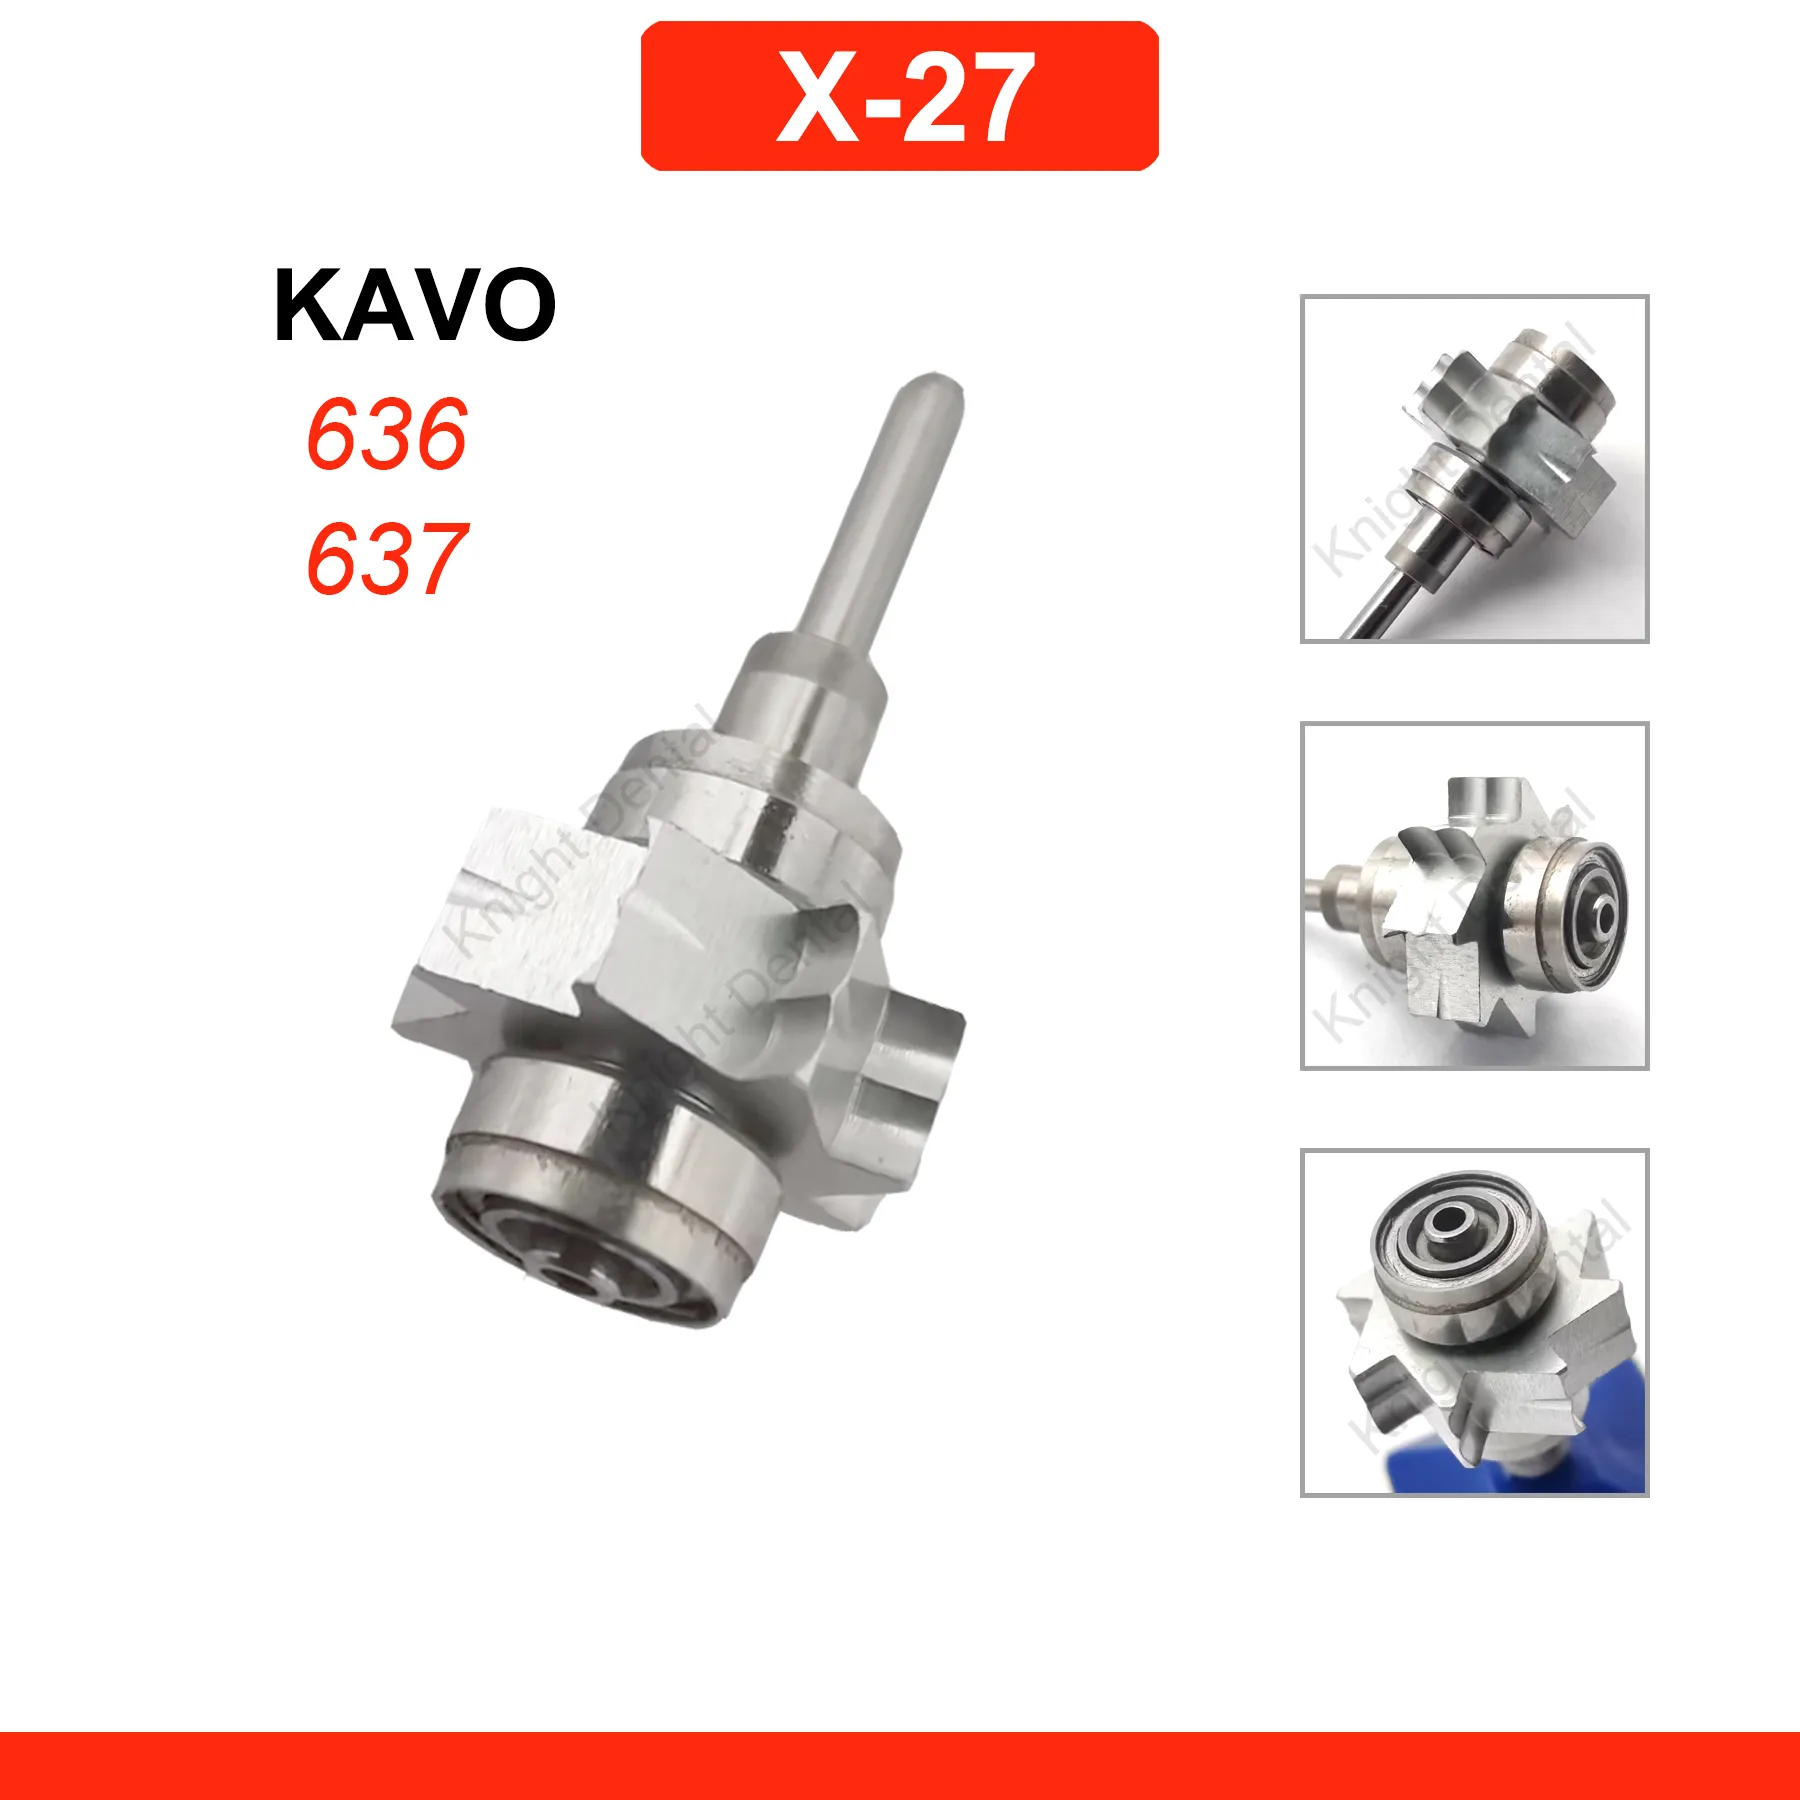 Dental Turbine Rotor Dentistry Turbine Cartridge Air Rotor Handpiece Rotor Dental Products Accessories Fit NSK KAVO W&H COXO